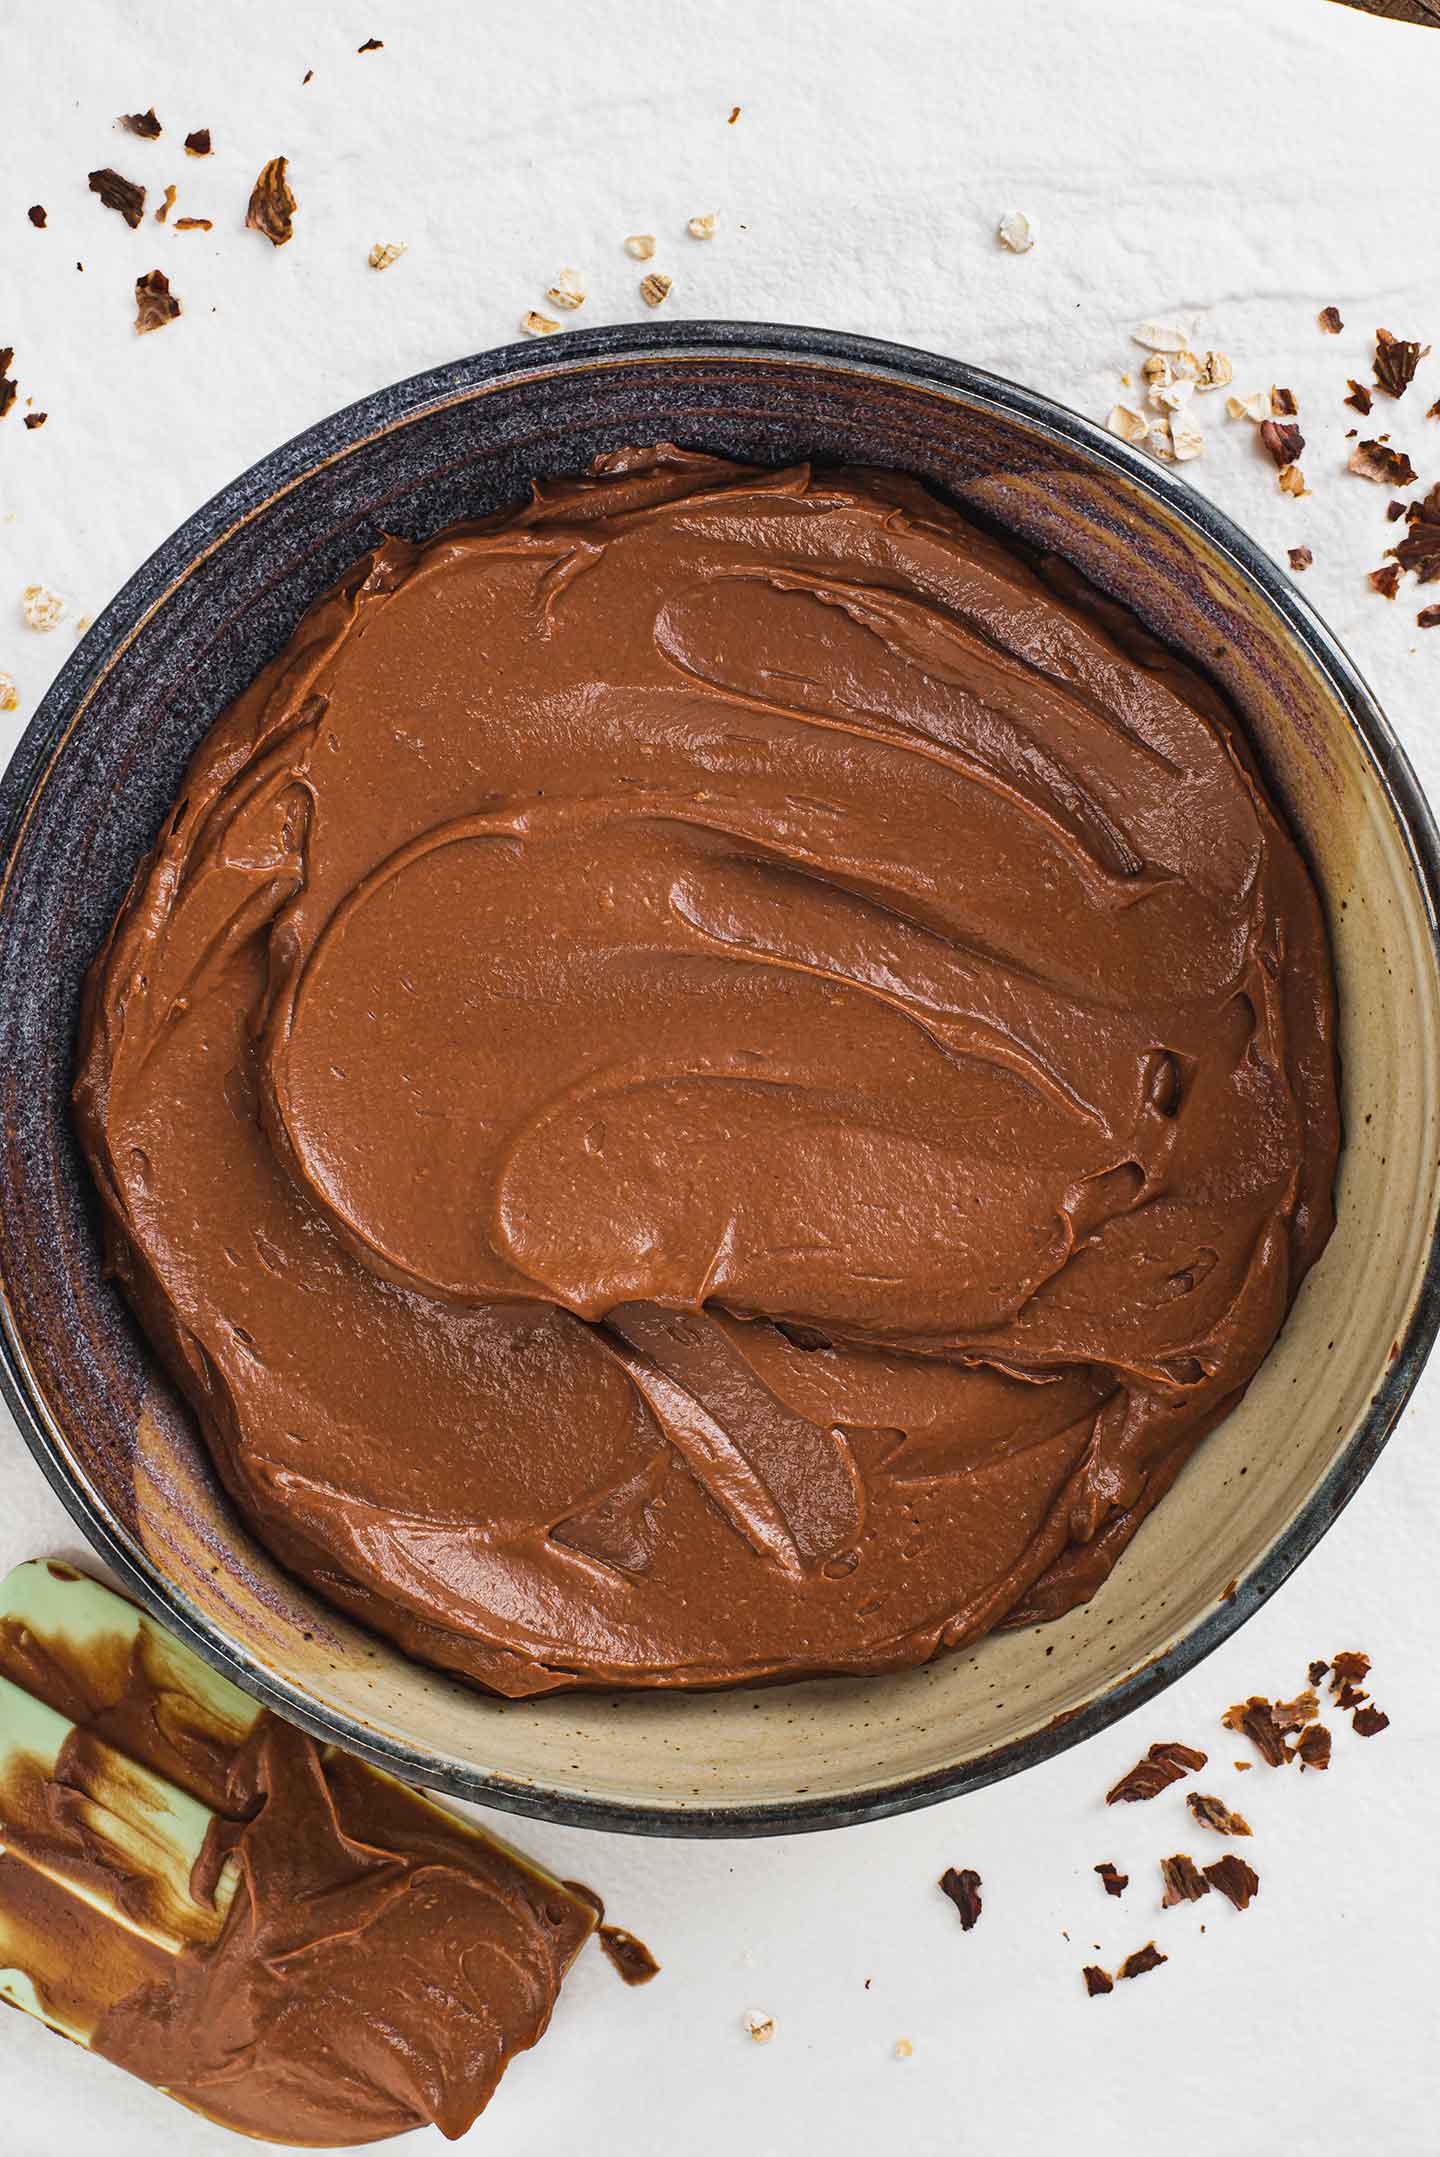 Top down view of the thick chocolate avocado mousse spread across the bottom of a shallow serving bowl. The base layer of the dessert.